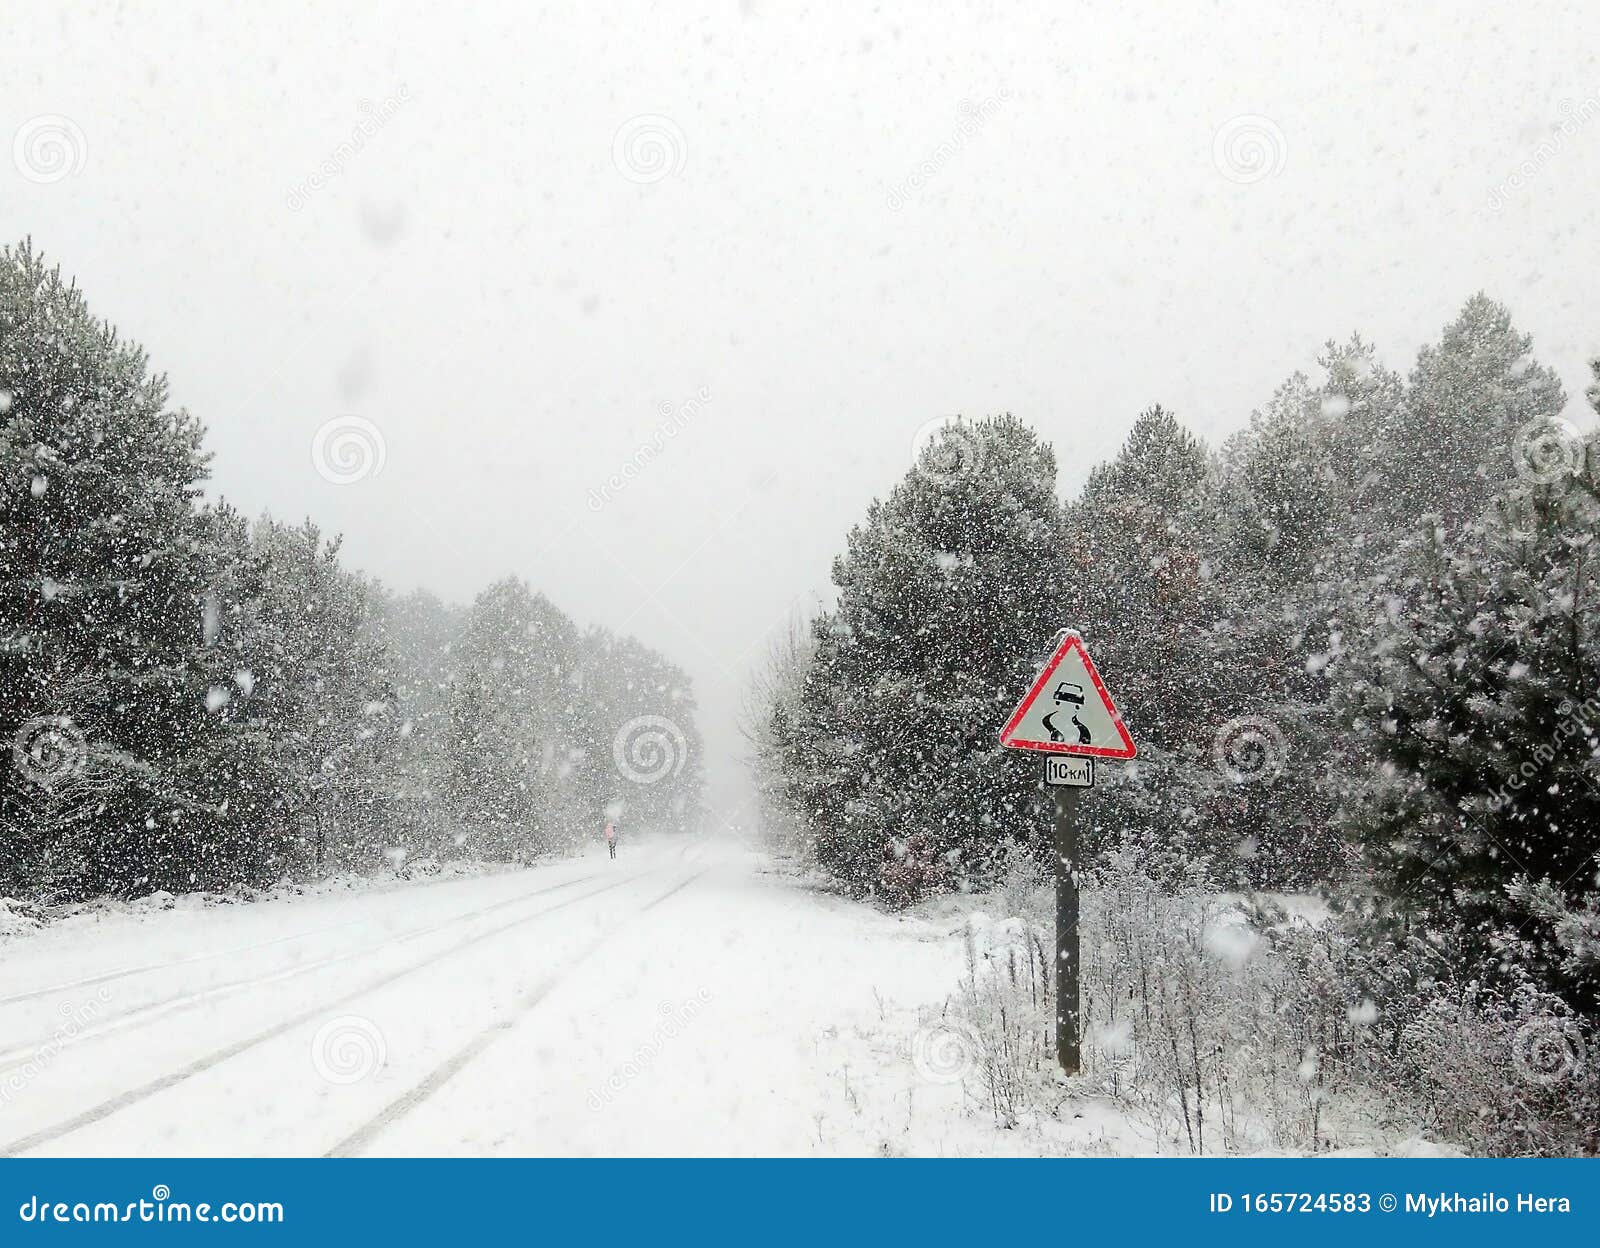 highway snow road - sudden and heavy snowfall on a thoroughfare driving on it becomes dangerous